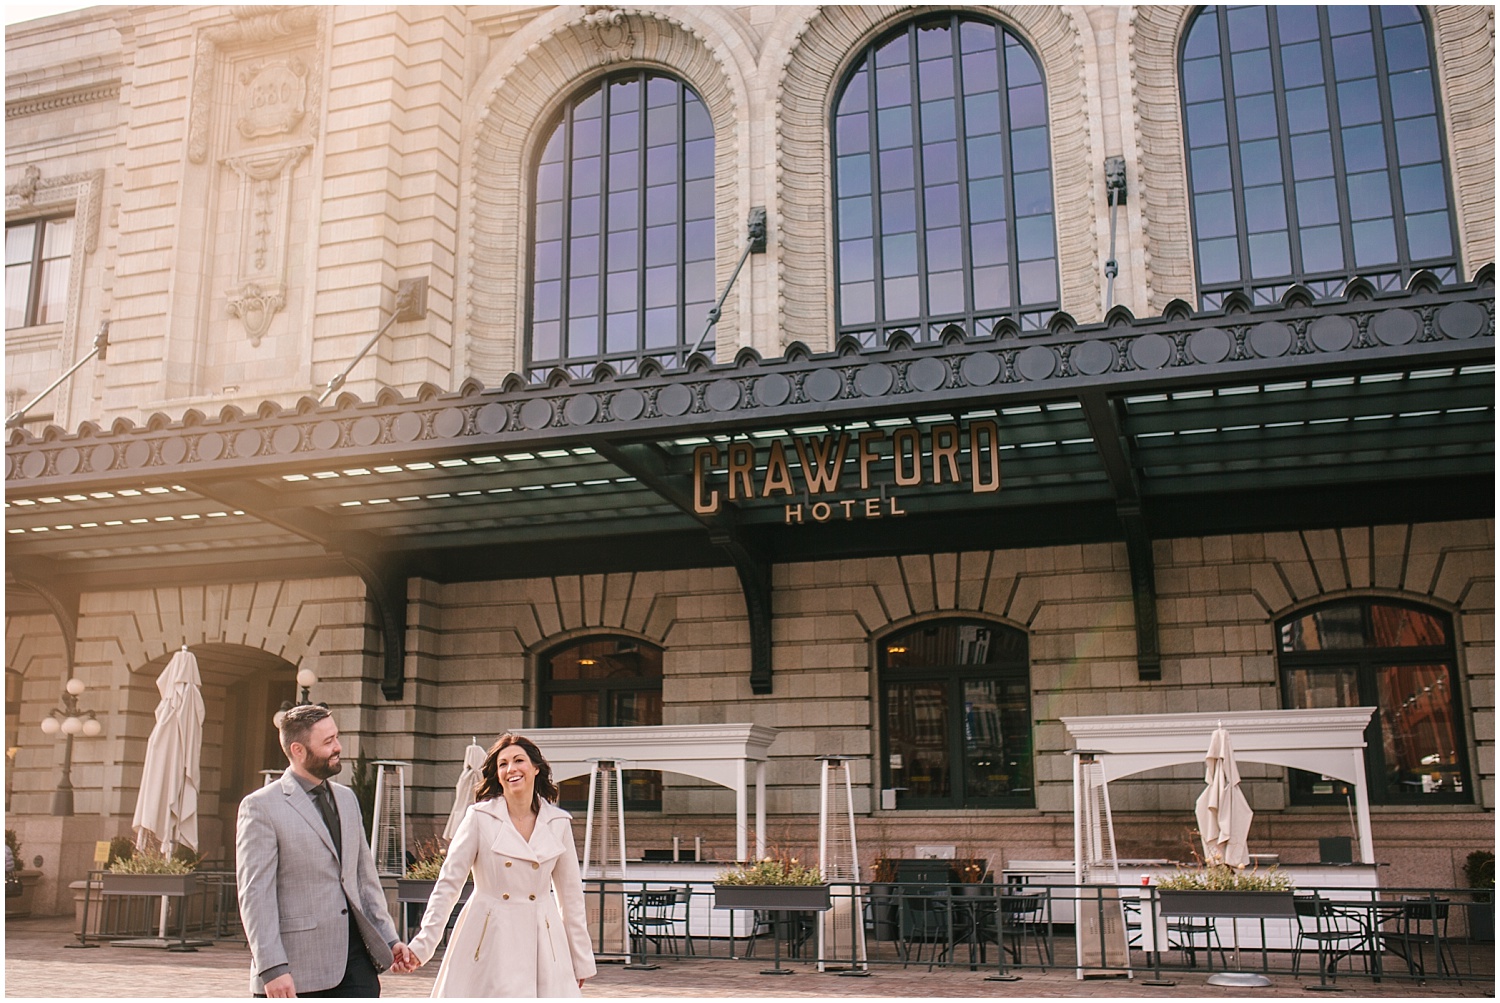 Downtown Denver engagement photos by Union Station in LoDo.